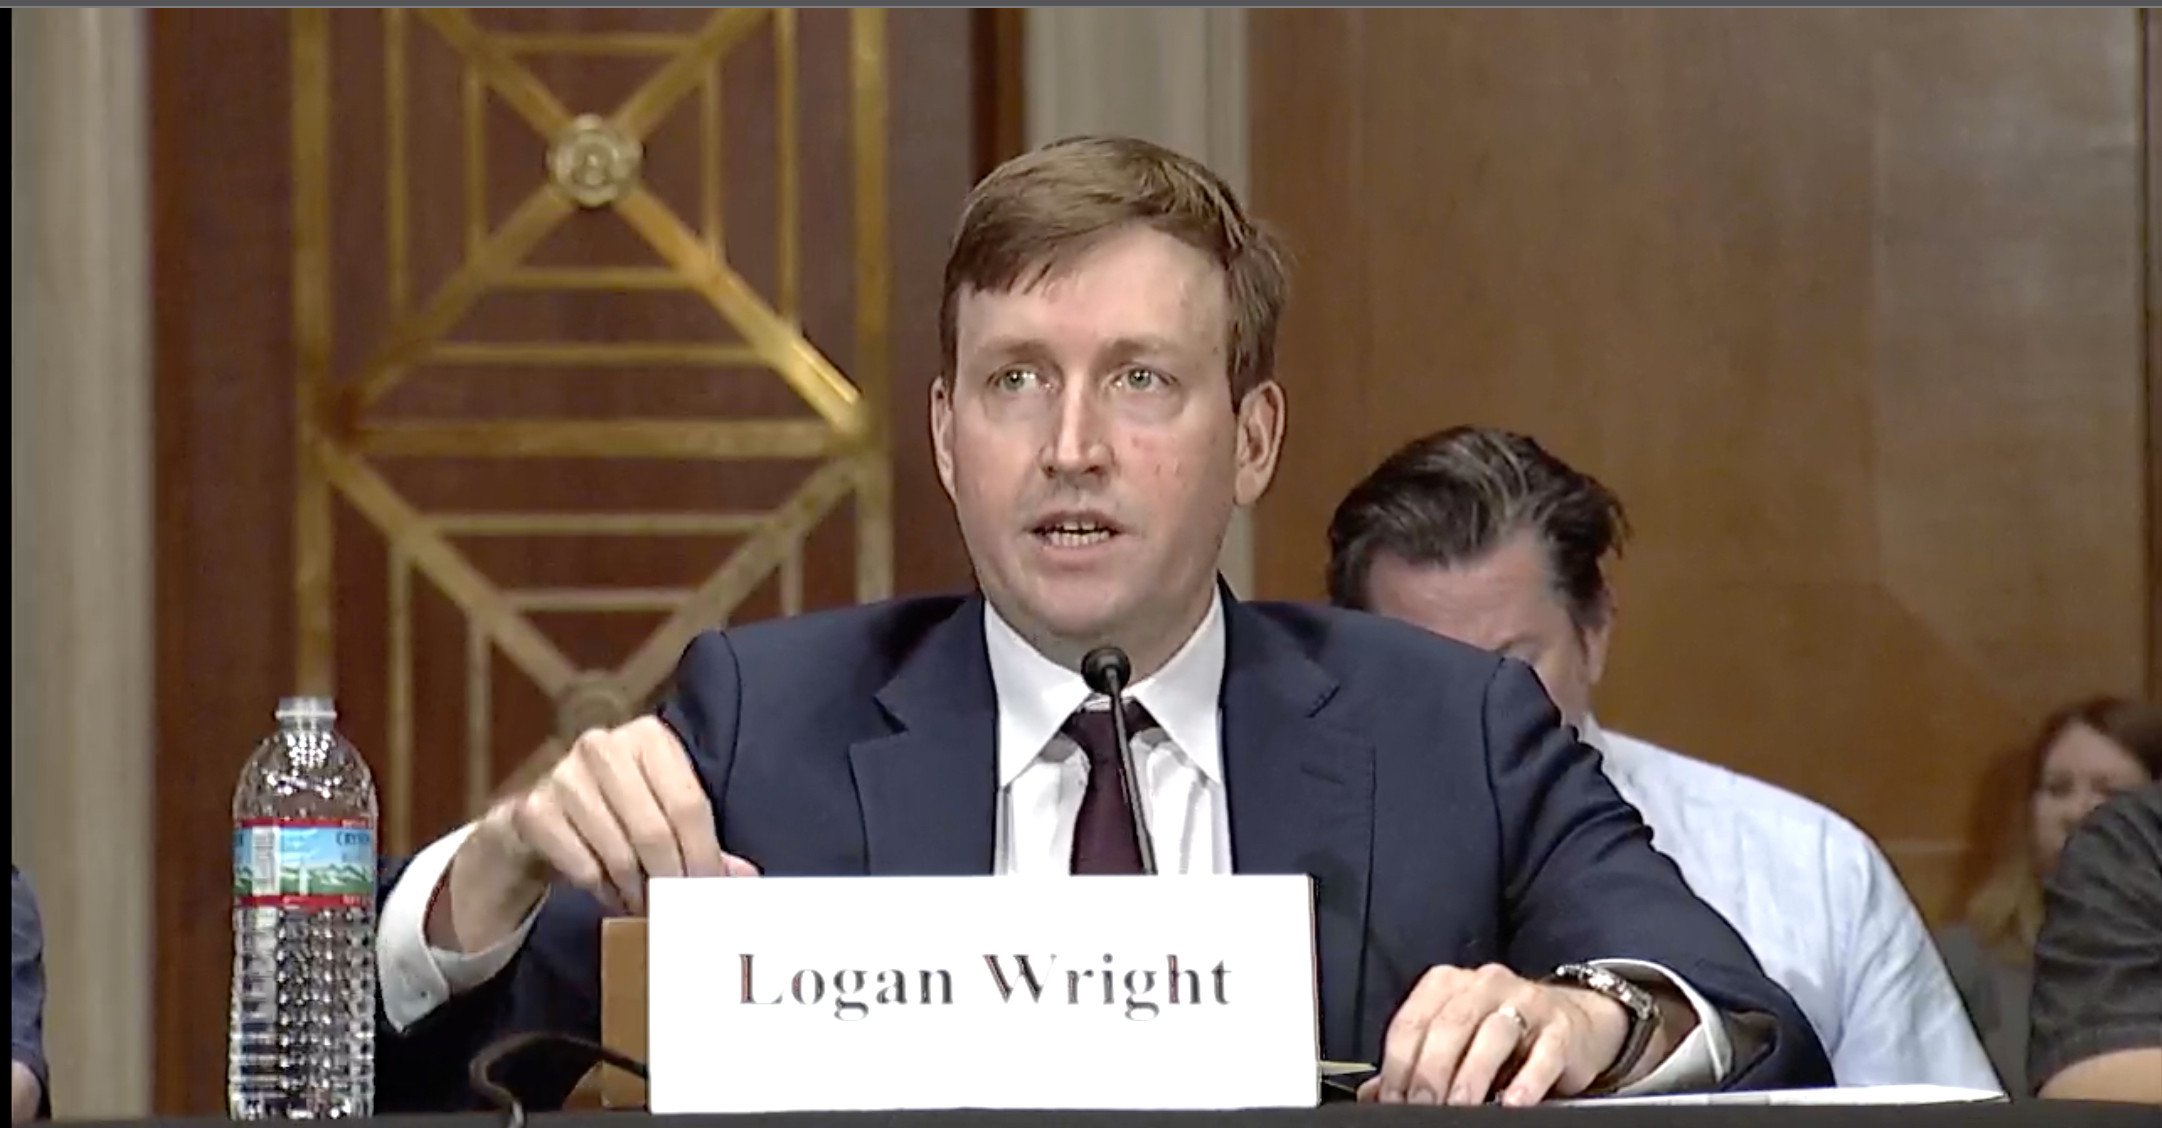 Logan Wright of Rhodium Group testifies in Washington on Monday that since 2020 about US$78 billion worth of China’s external loans through its Belt and Road Initiative are either in default or under renegotiation.